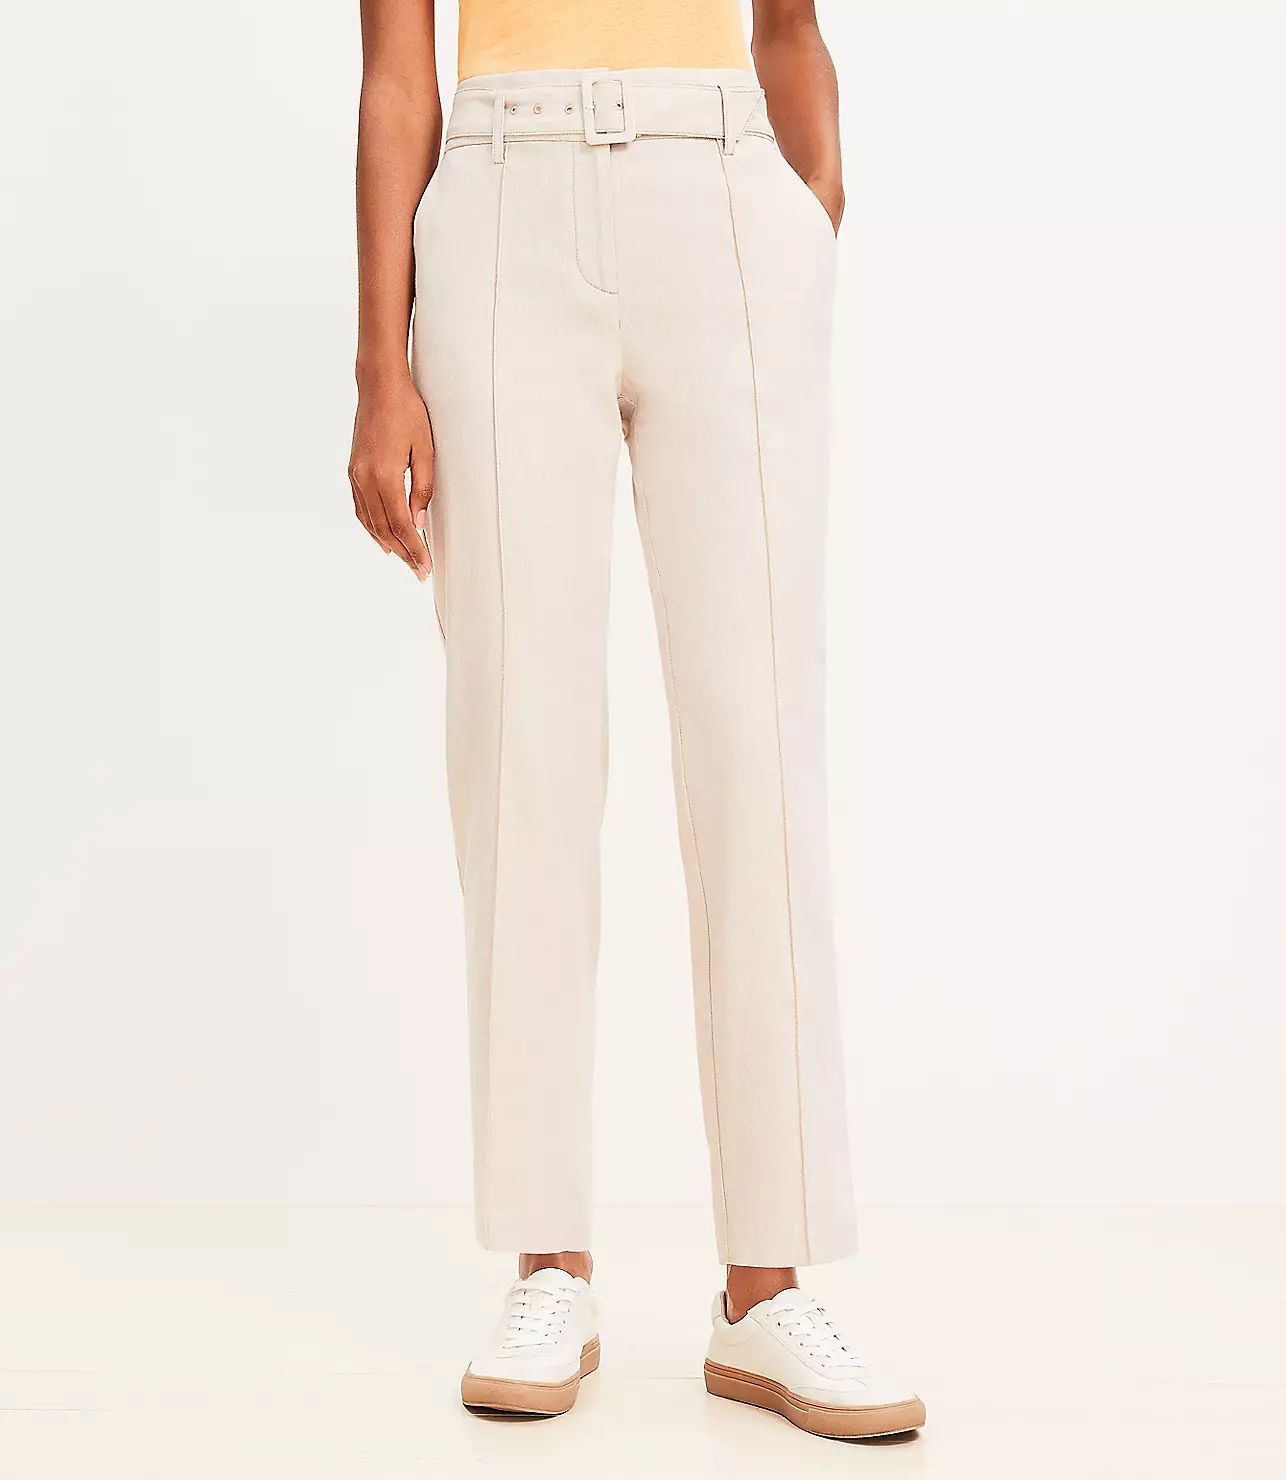 Pintucked Belted Slim Pants in Twill | LOFT